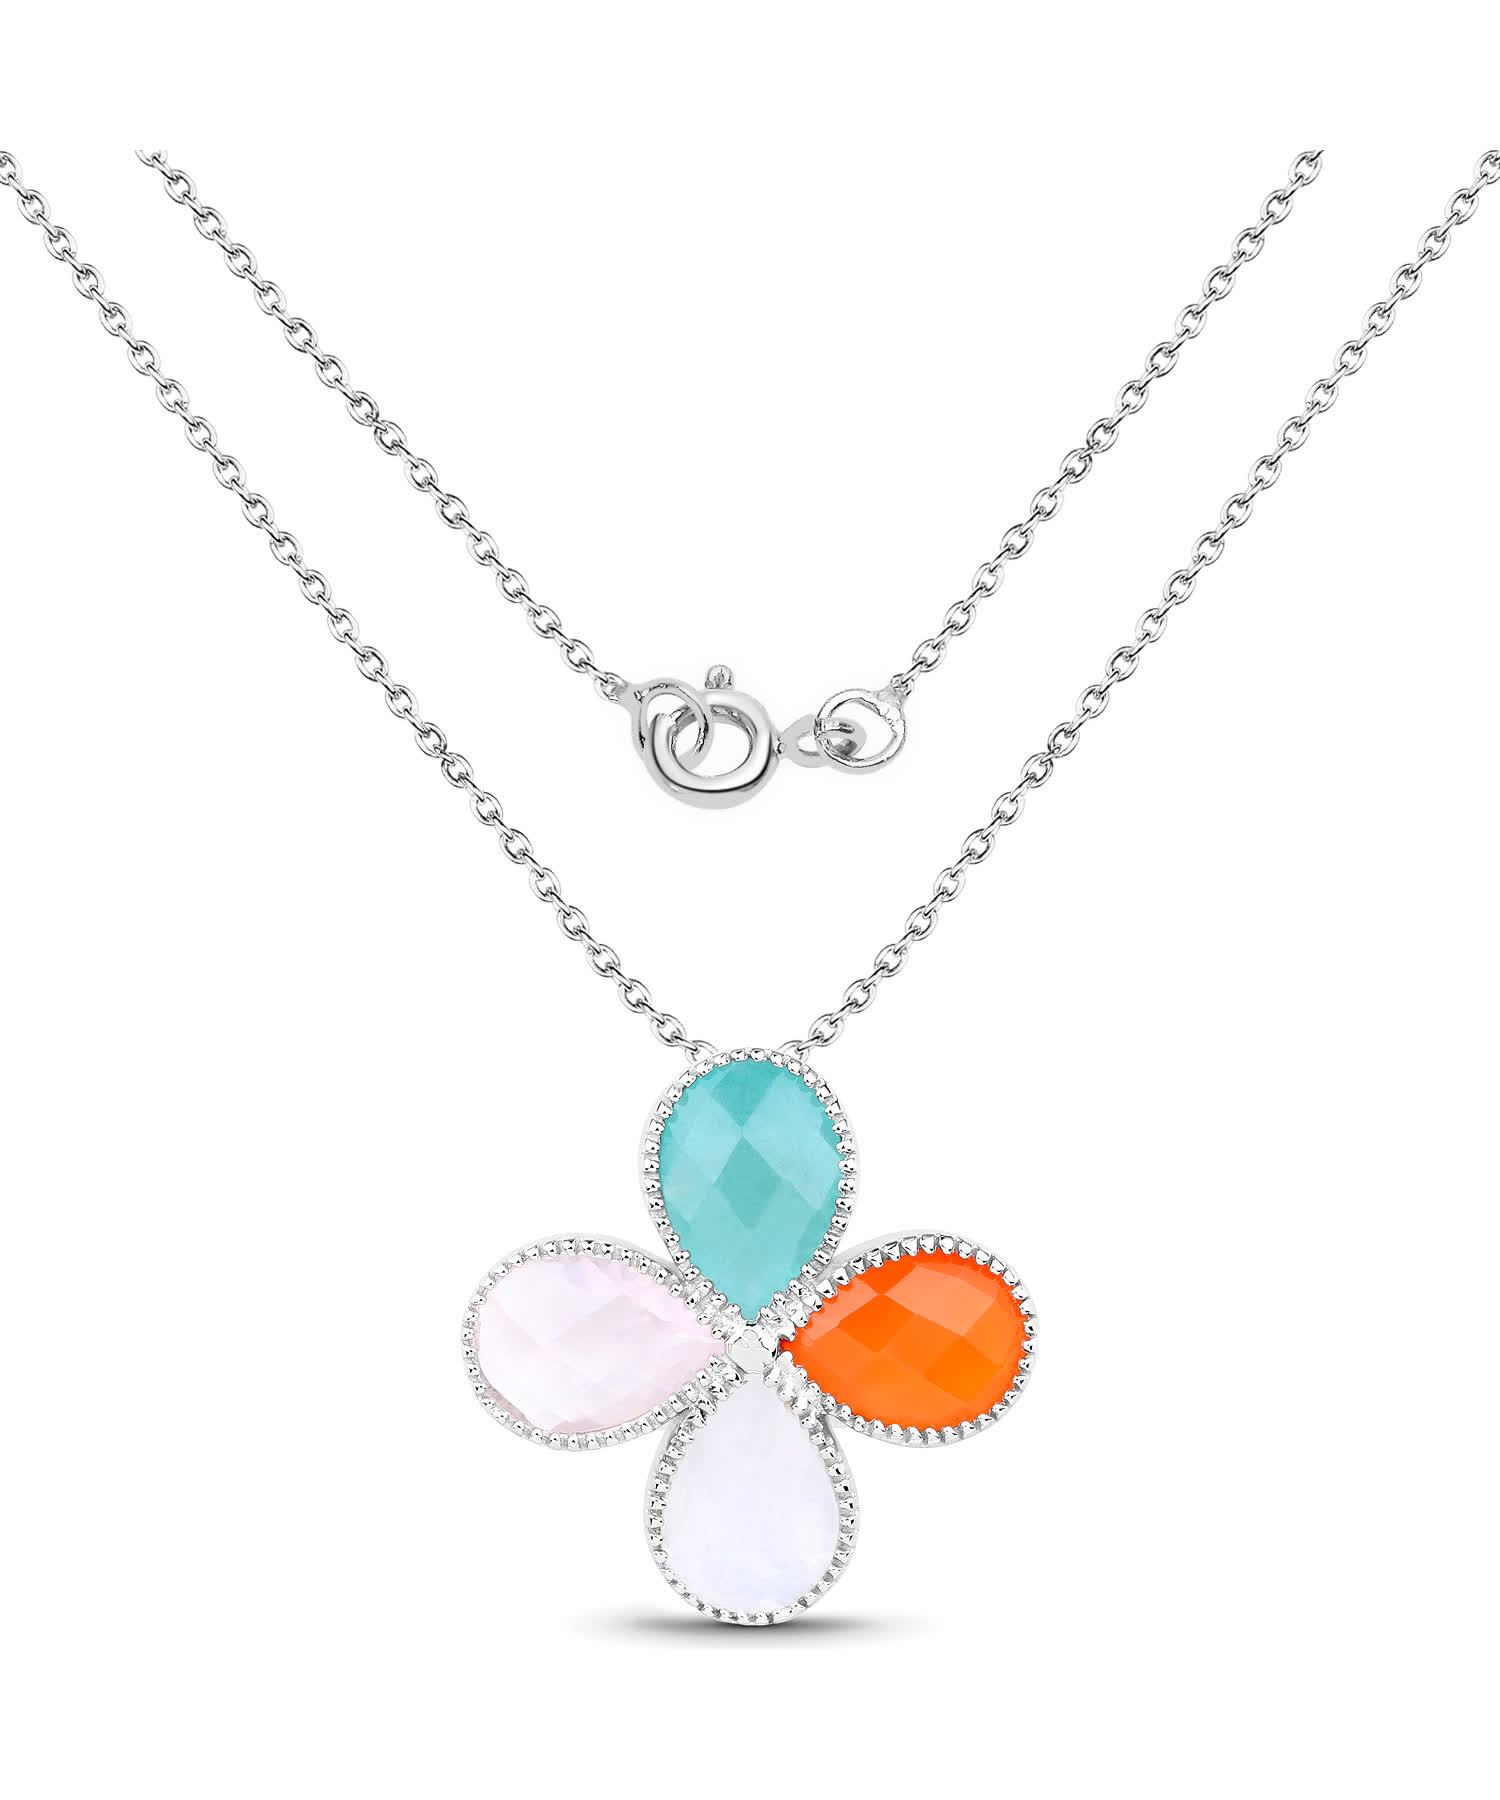 9.68ctw Natural Rose Quartz, Carnelian, Amazonite and Moonstone Rhodium Plated 925 Sterling Silver Pendant With Chain View 2